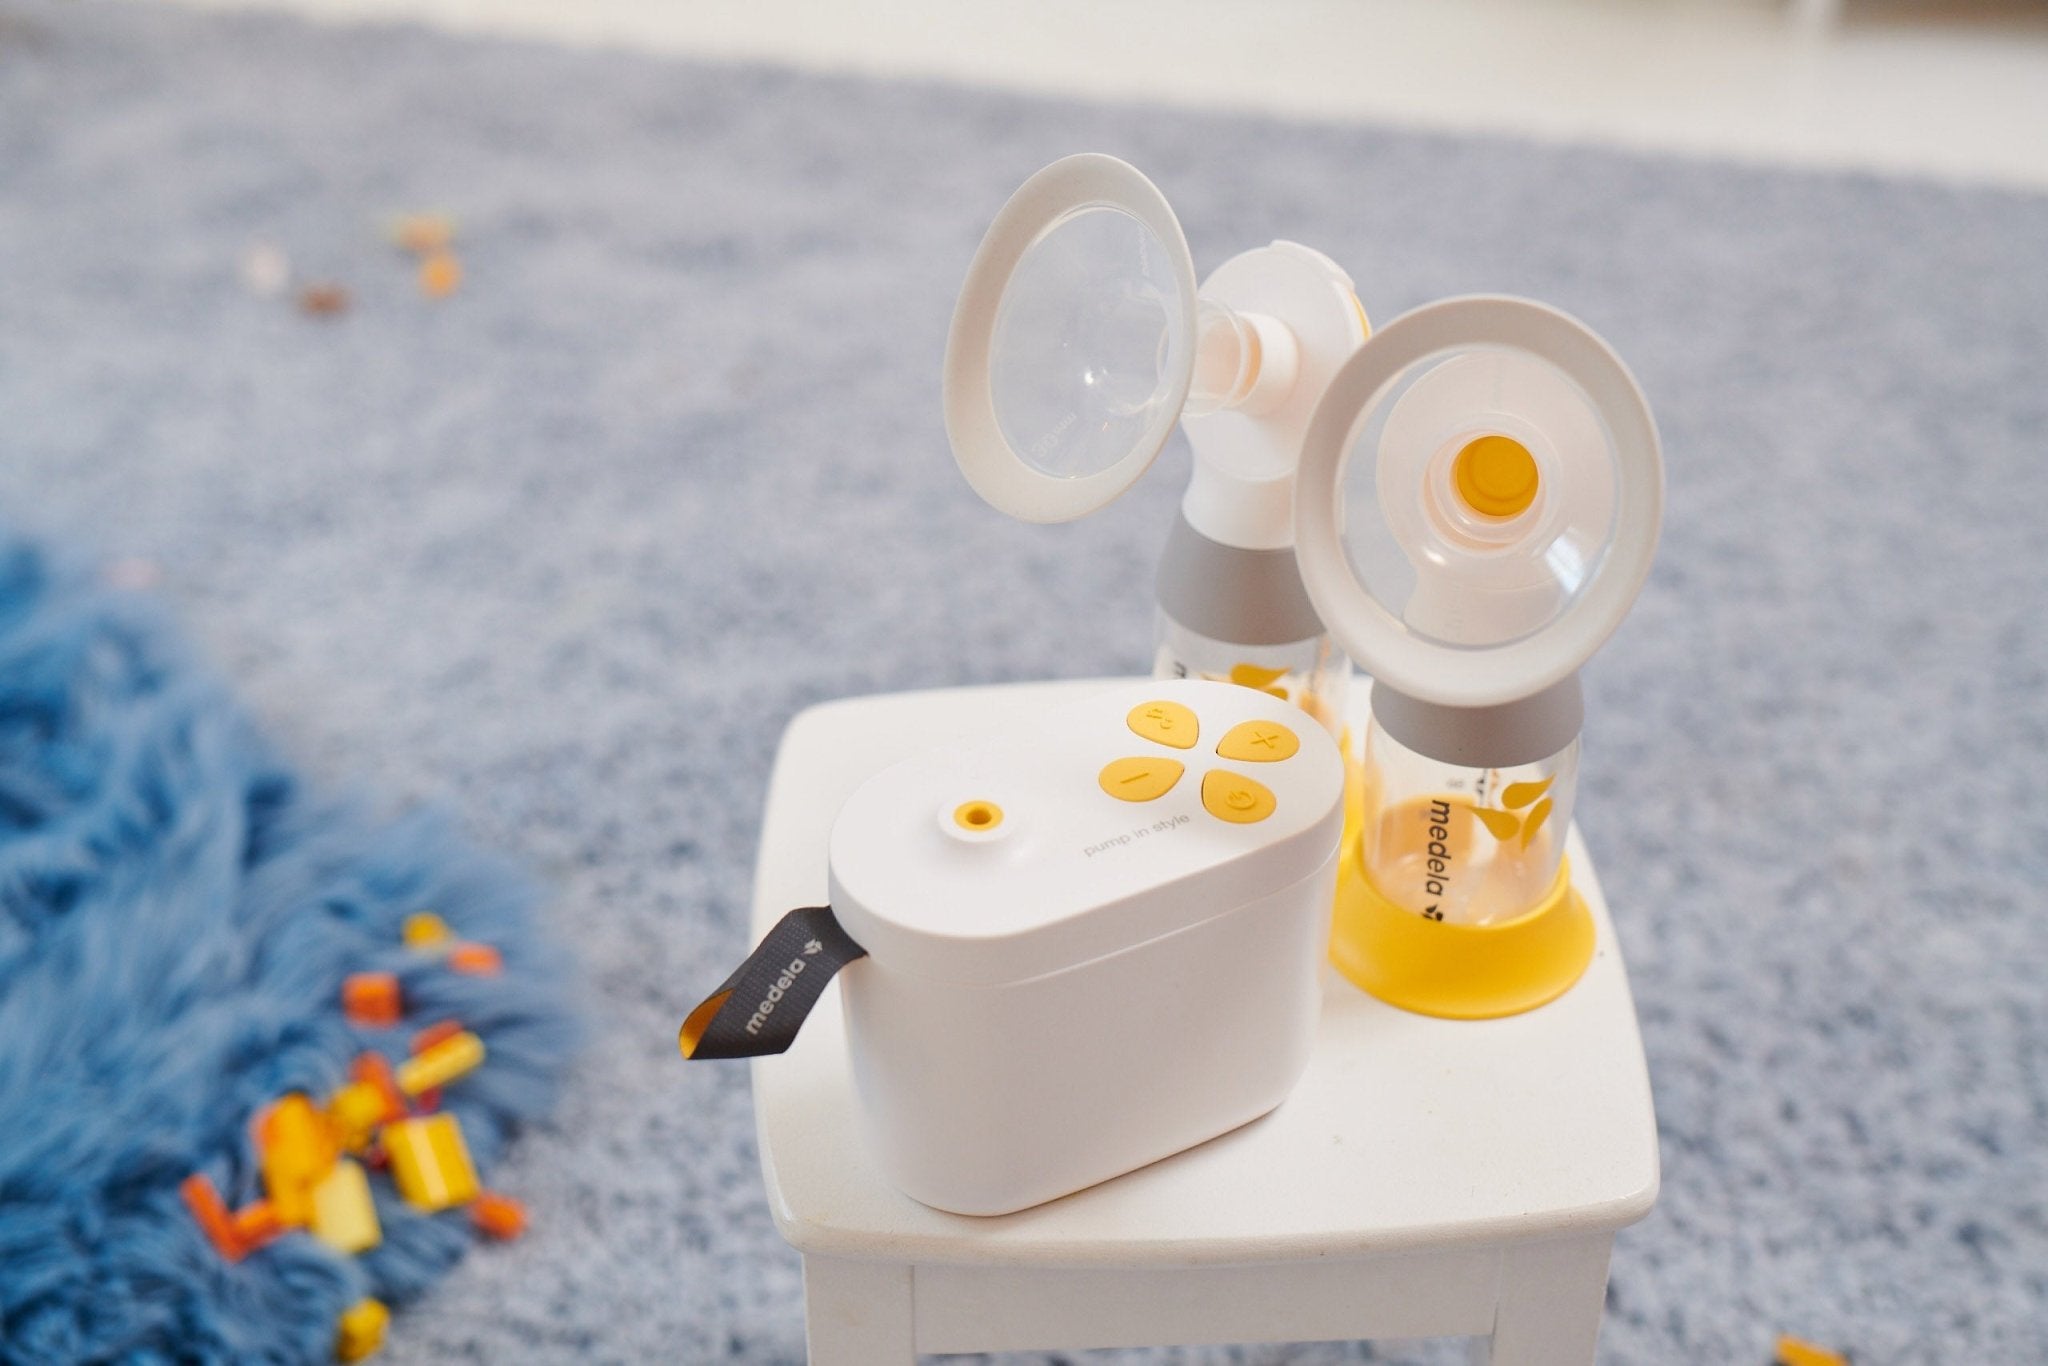 Medela Pump In Style Max Flow Double Electric Breast Pump, -- ANB Baby